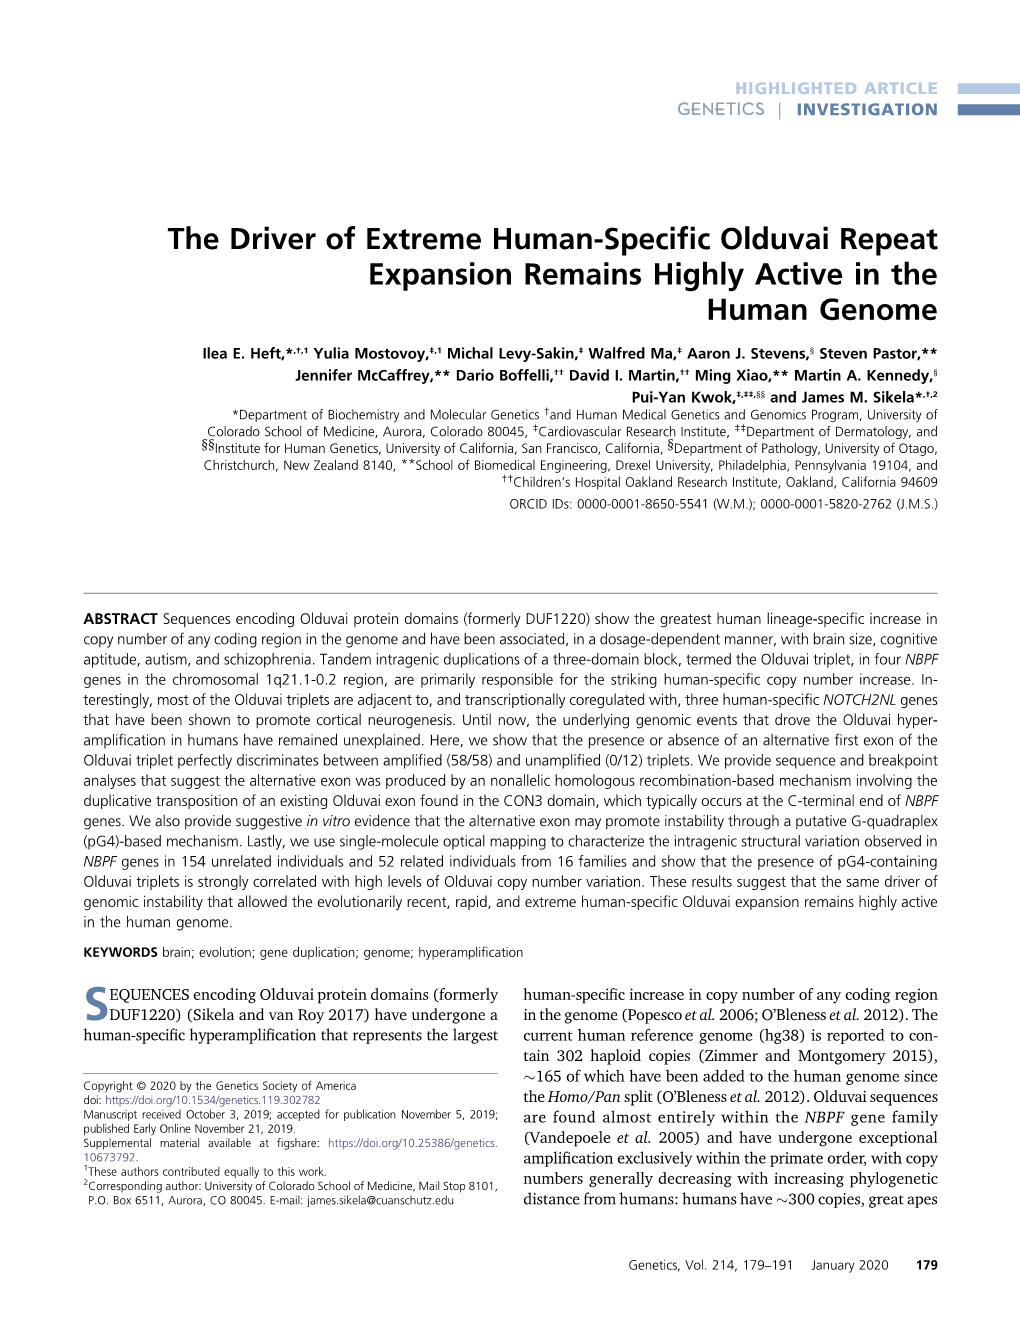 The Driver of Extreme Human-Specific Olduvai Repeat